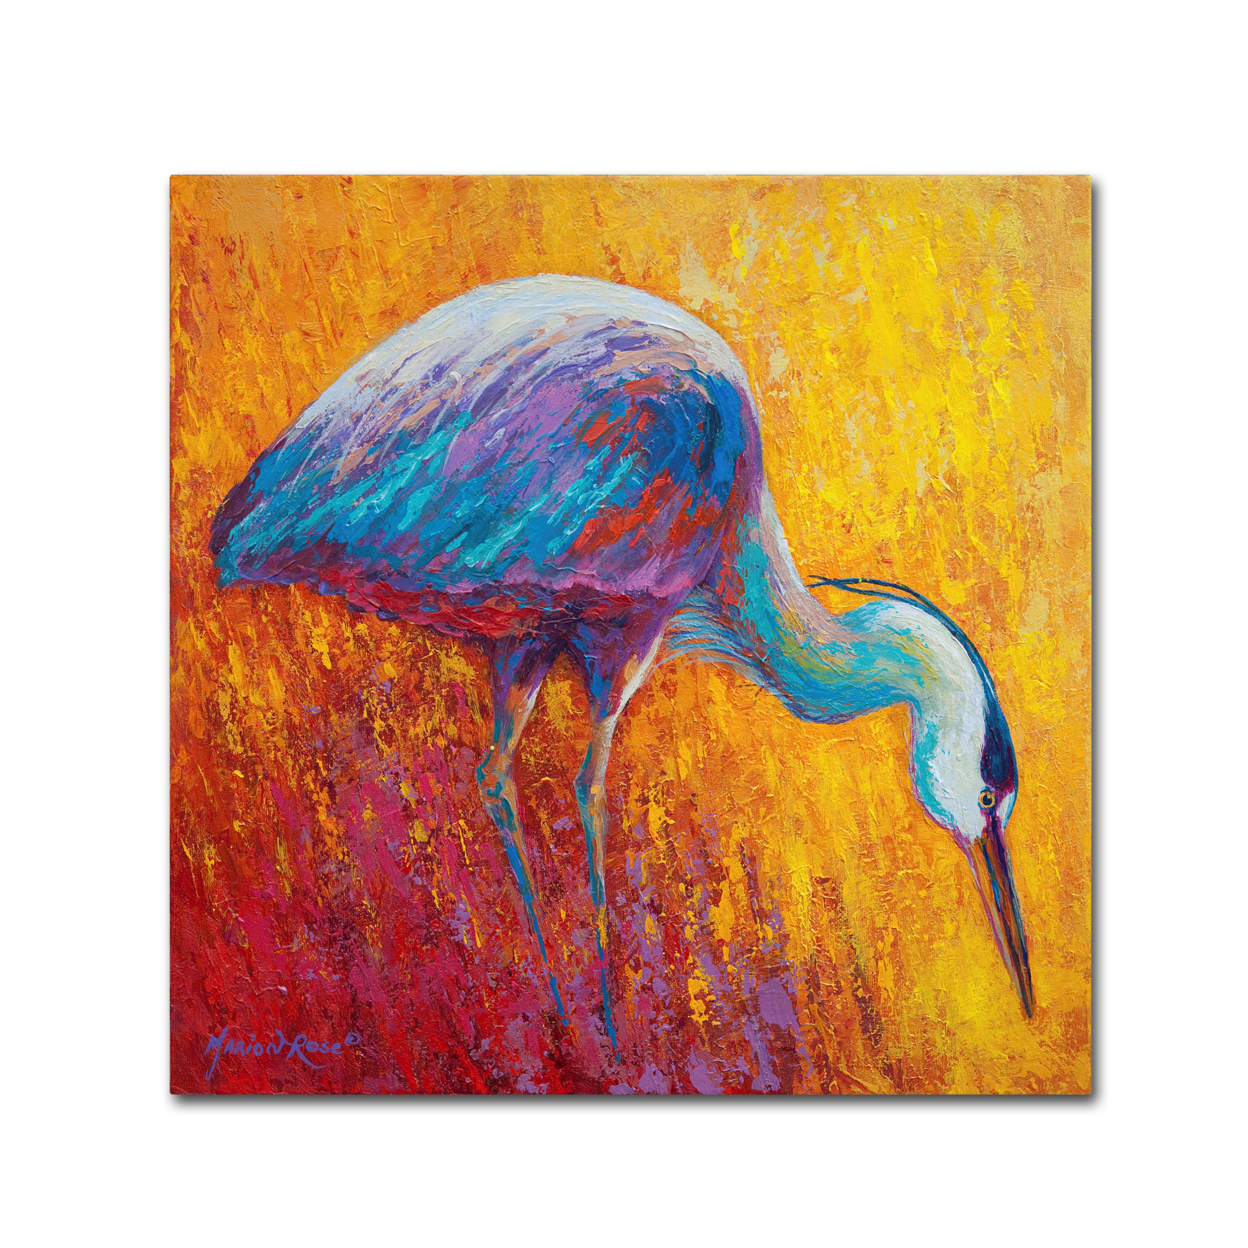 Marion Rose 'Daddy Long Legs IV' Ready To Hang Canvas Art 24 X 24 Inches Made In USA